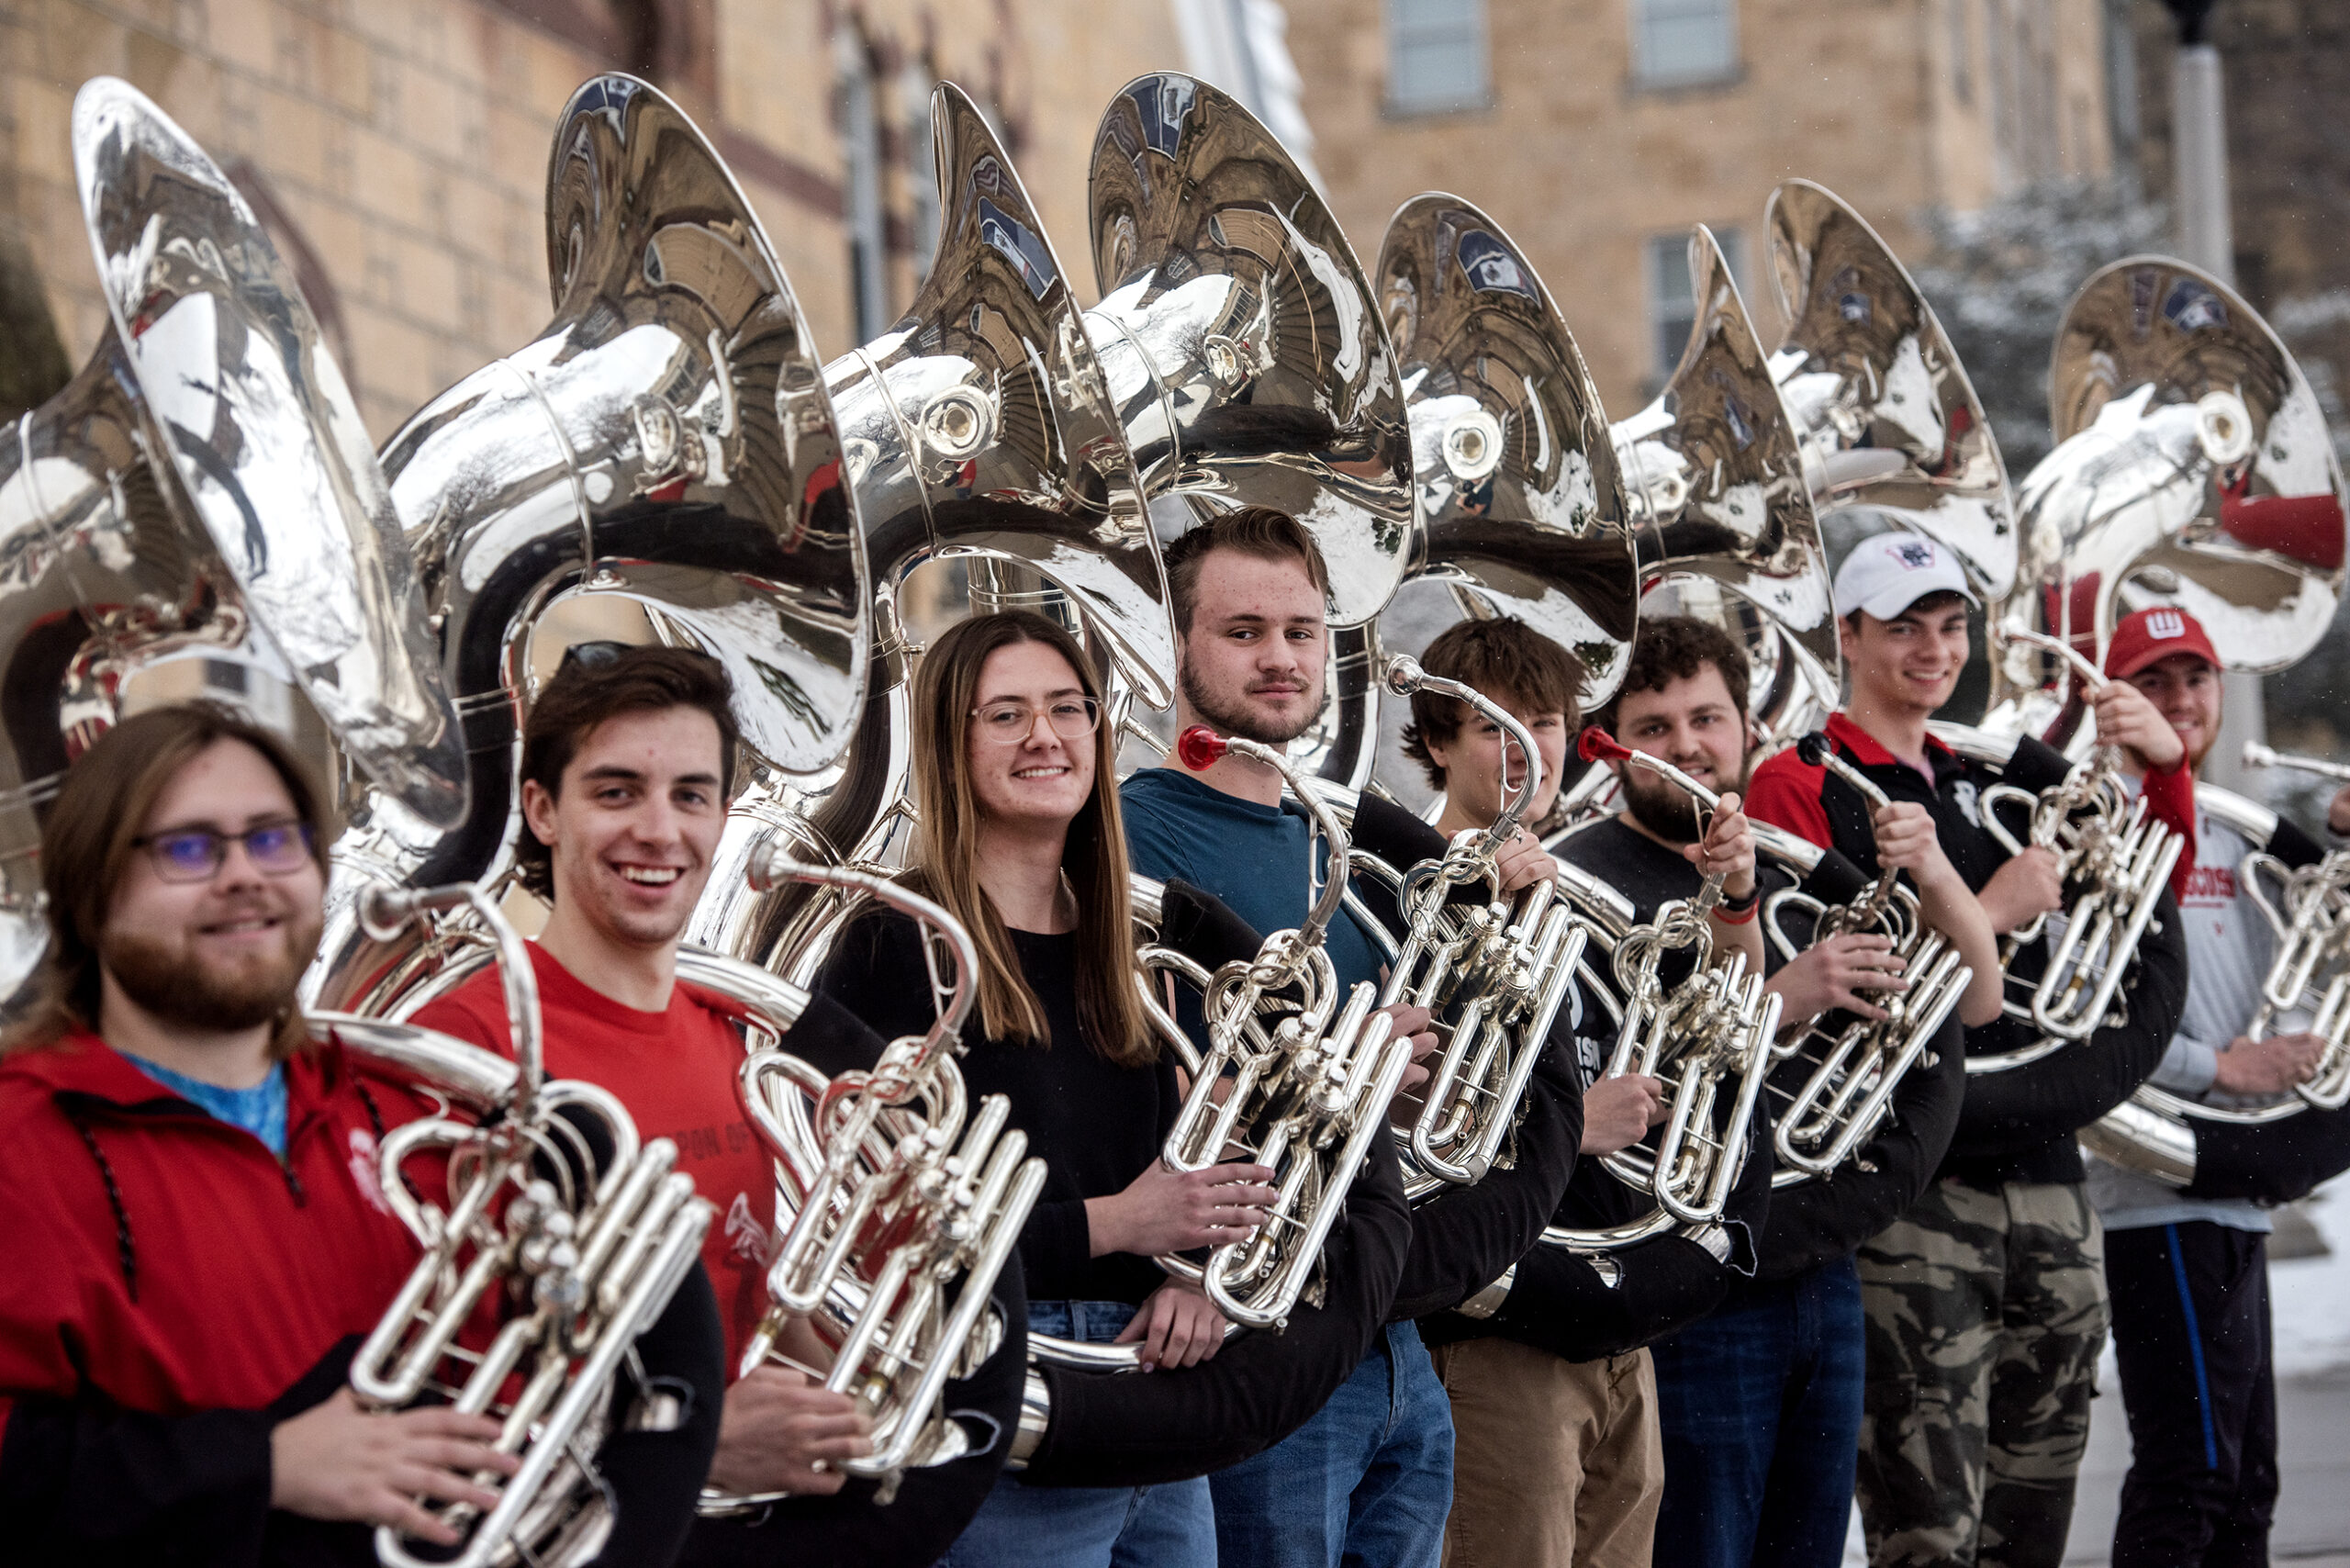 Tubas in Wisconsin: Getting down to brass tacks